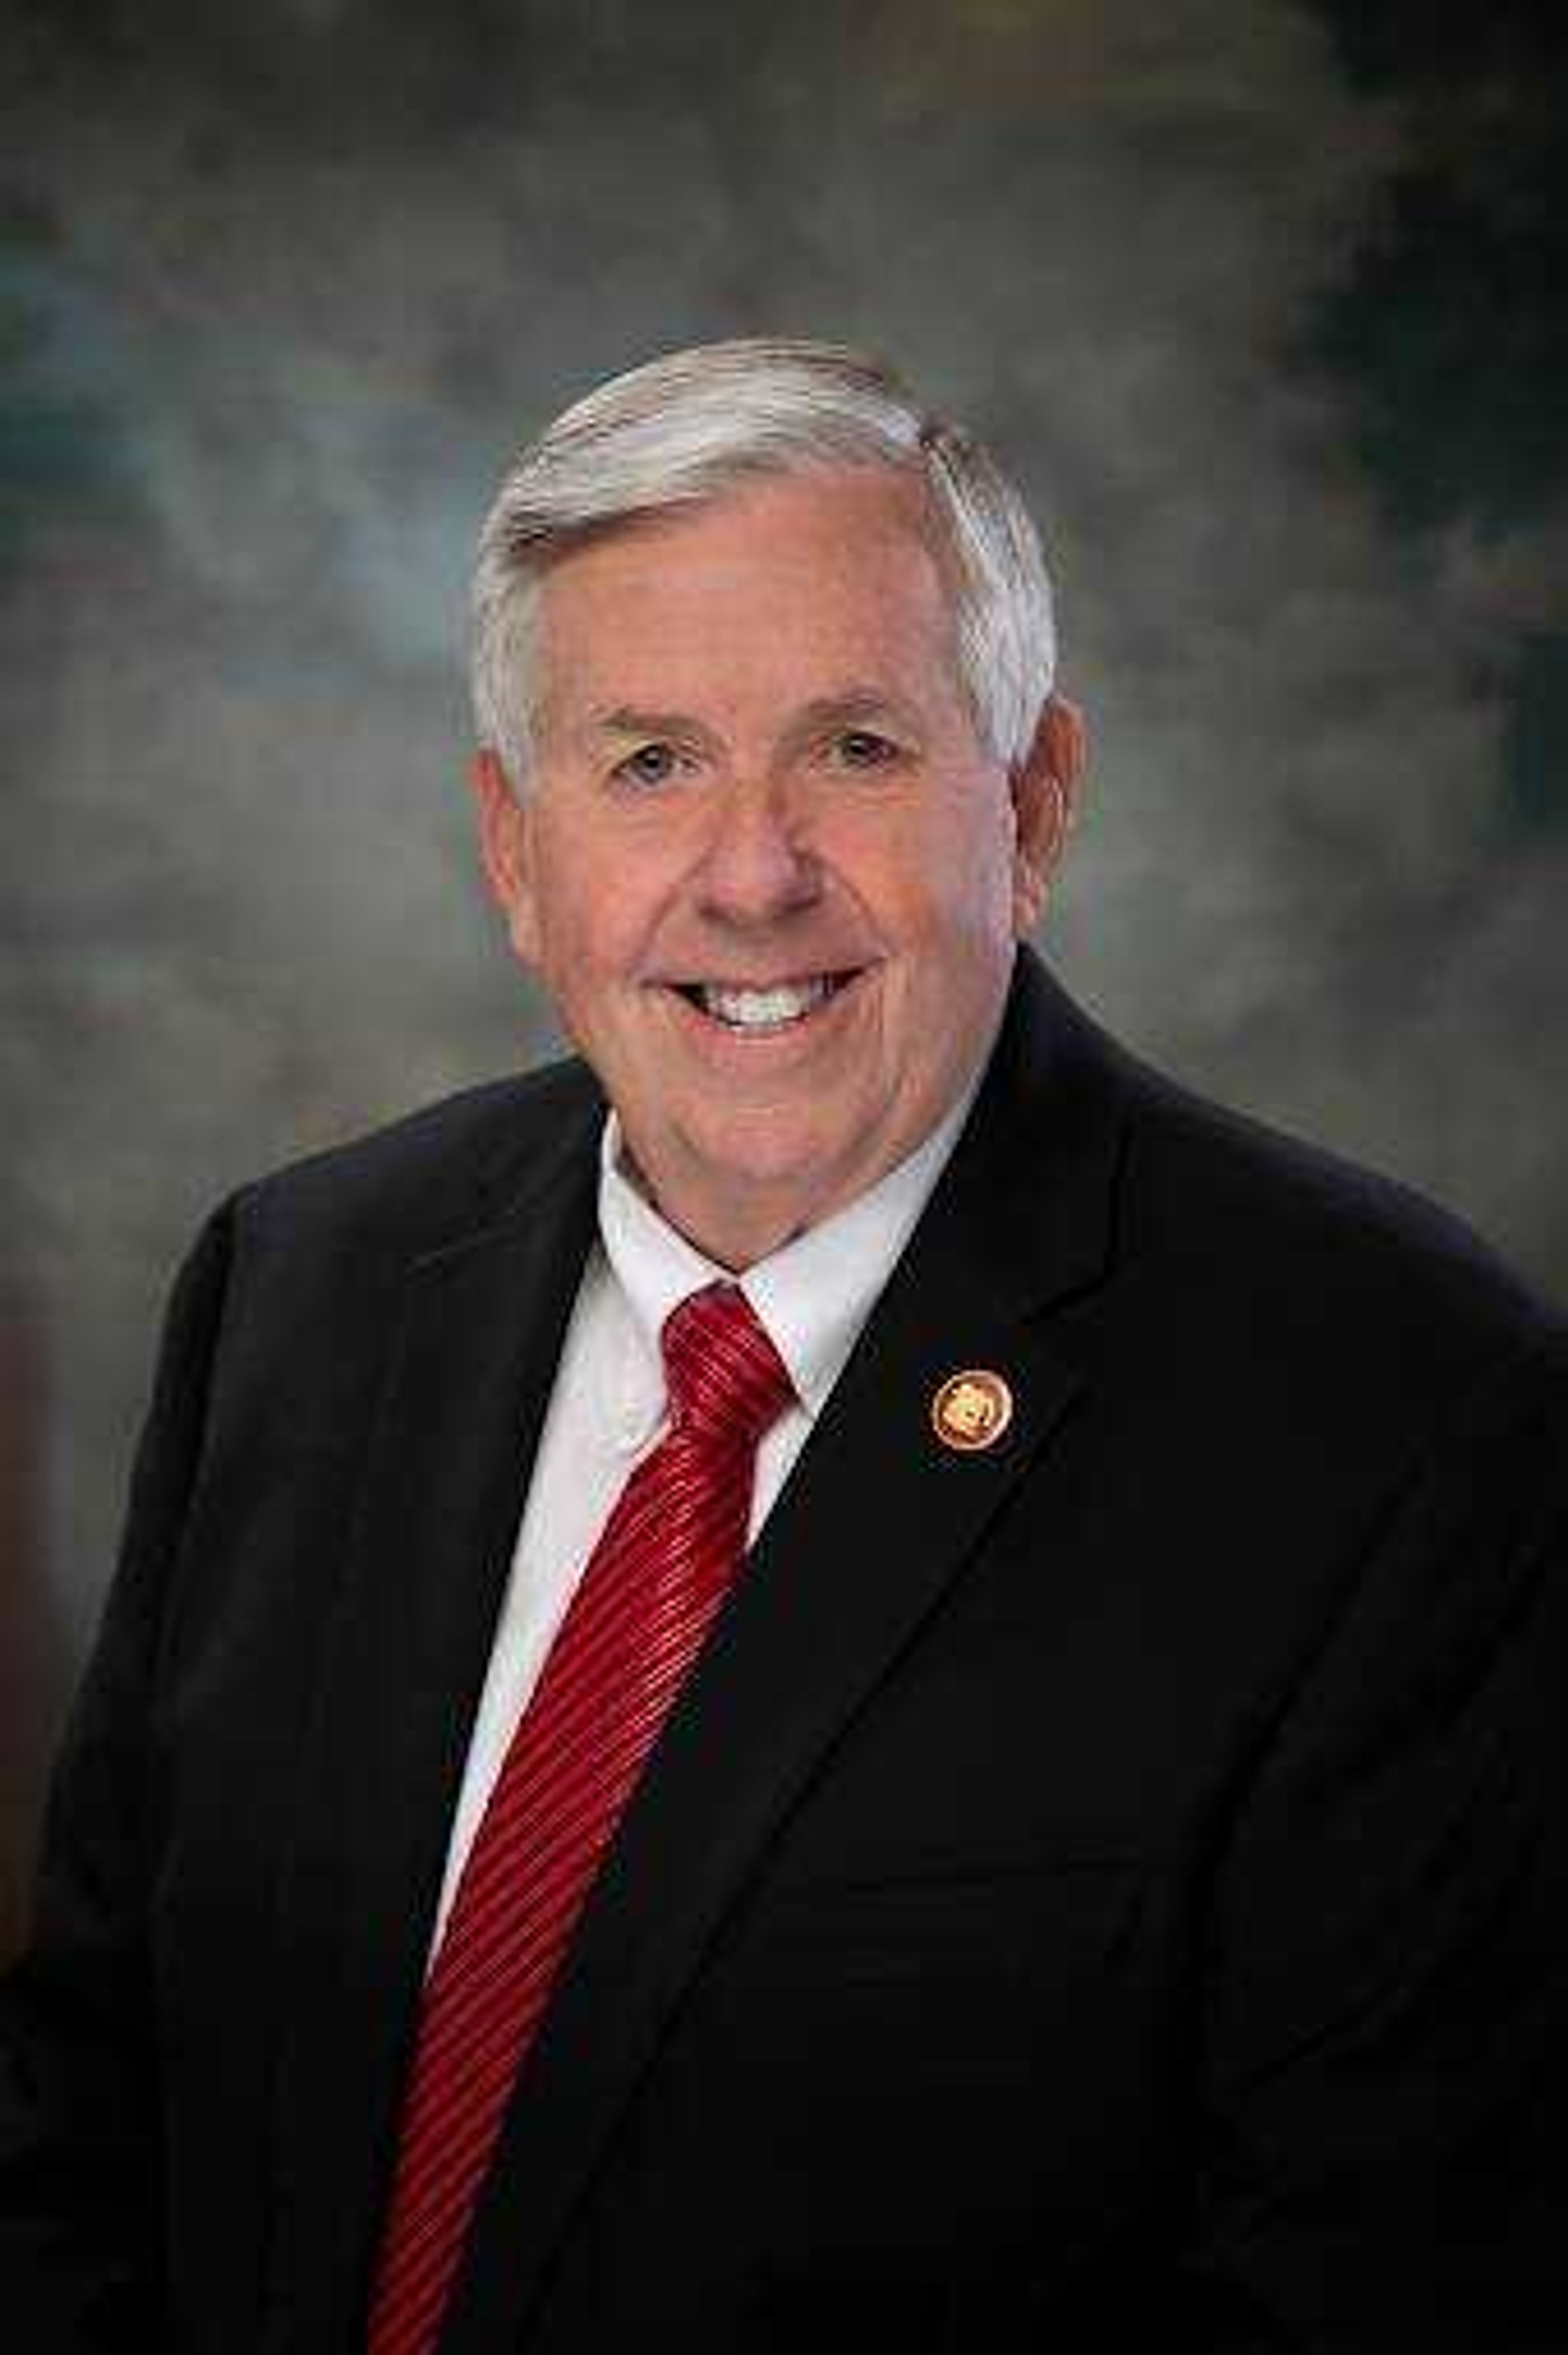 Gov. Parson proposes $600 million dollar investment in higher ed projects